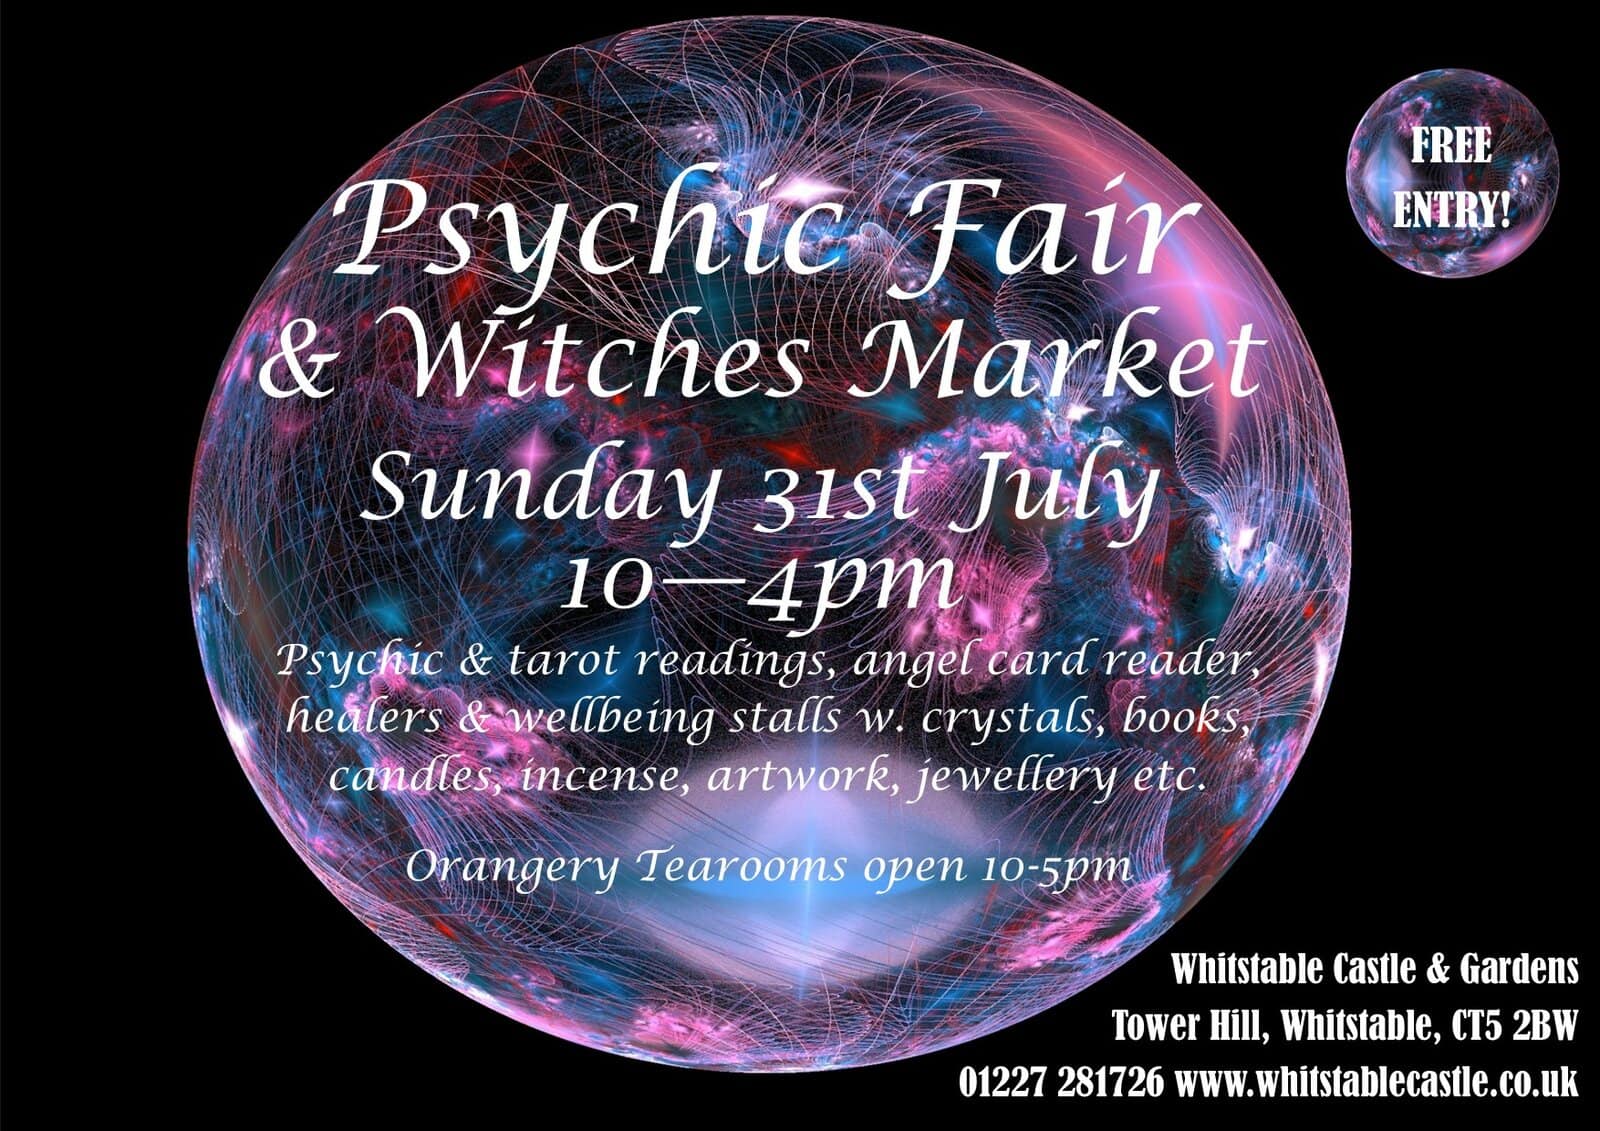 Psychic Fair & Witches Market Whitstable Castle & Gardens